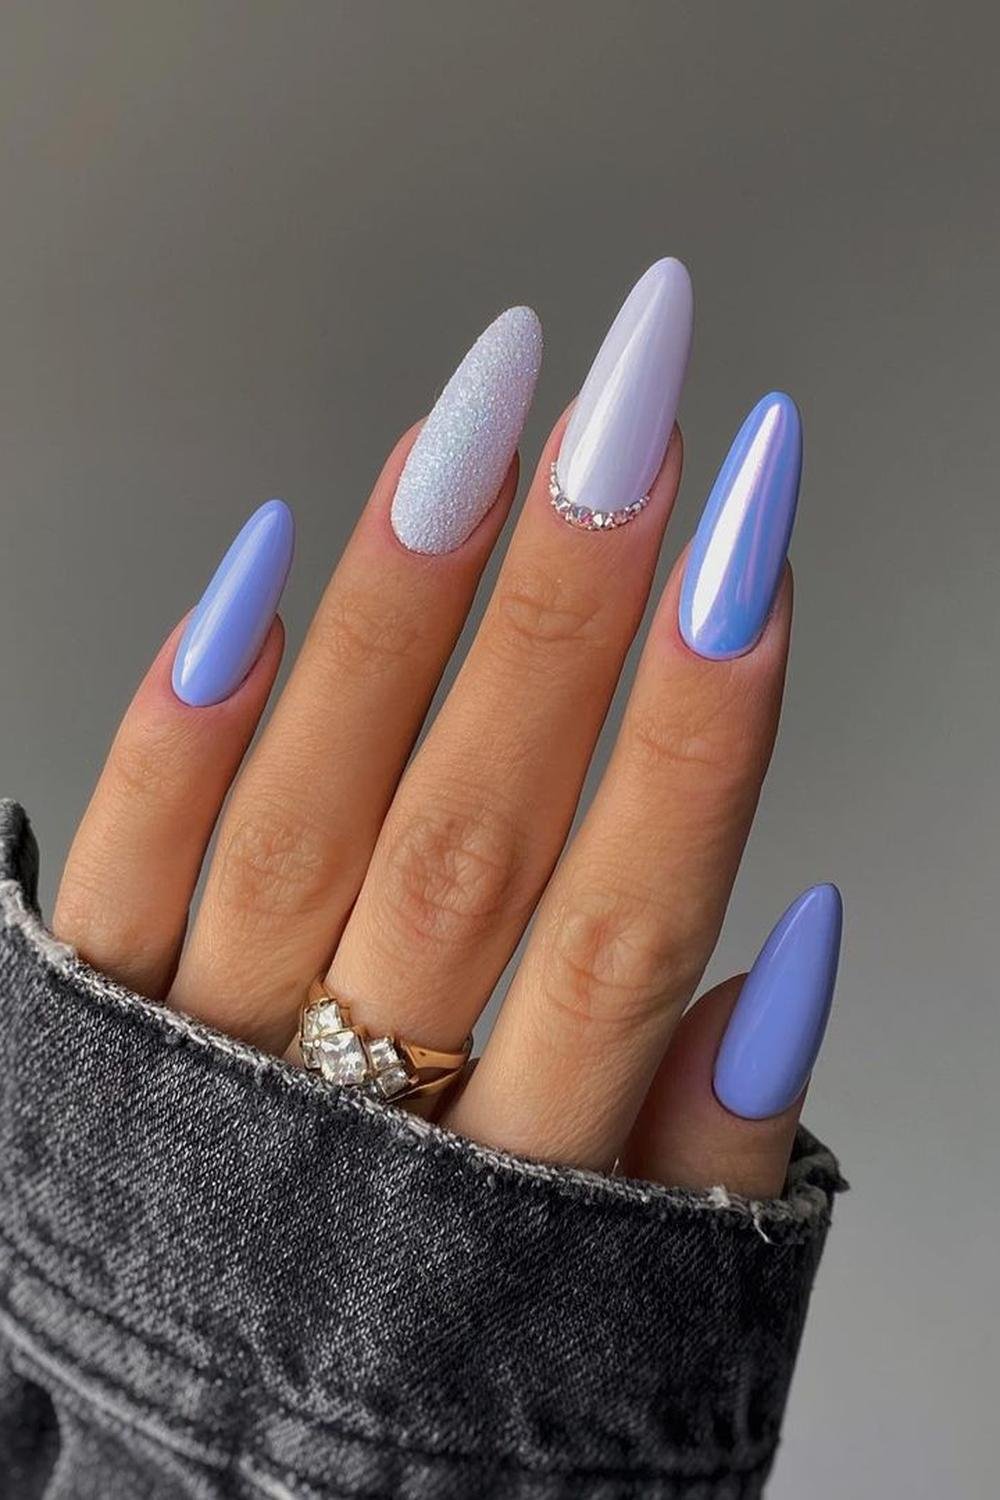 24 - Picture of Purple Nails